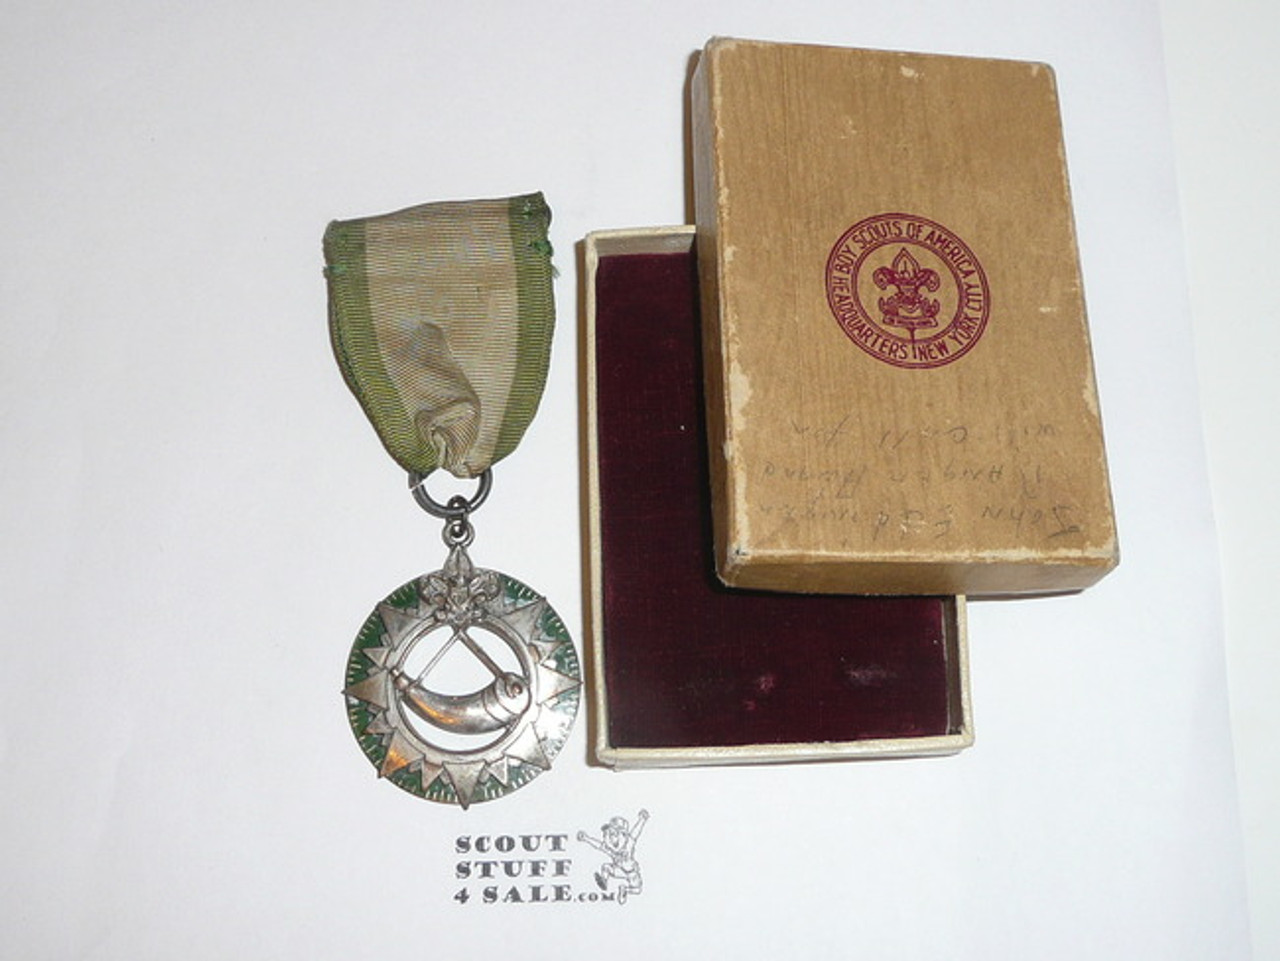 Ranger Award Medal, 1940's, Lite wear to pendant but ribbon has some fade and pin bar is missing, Original Box